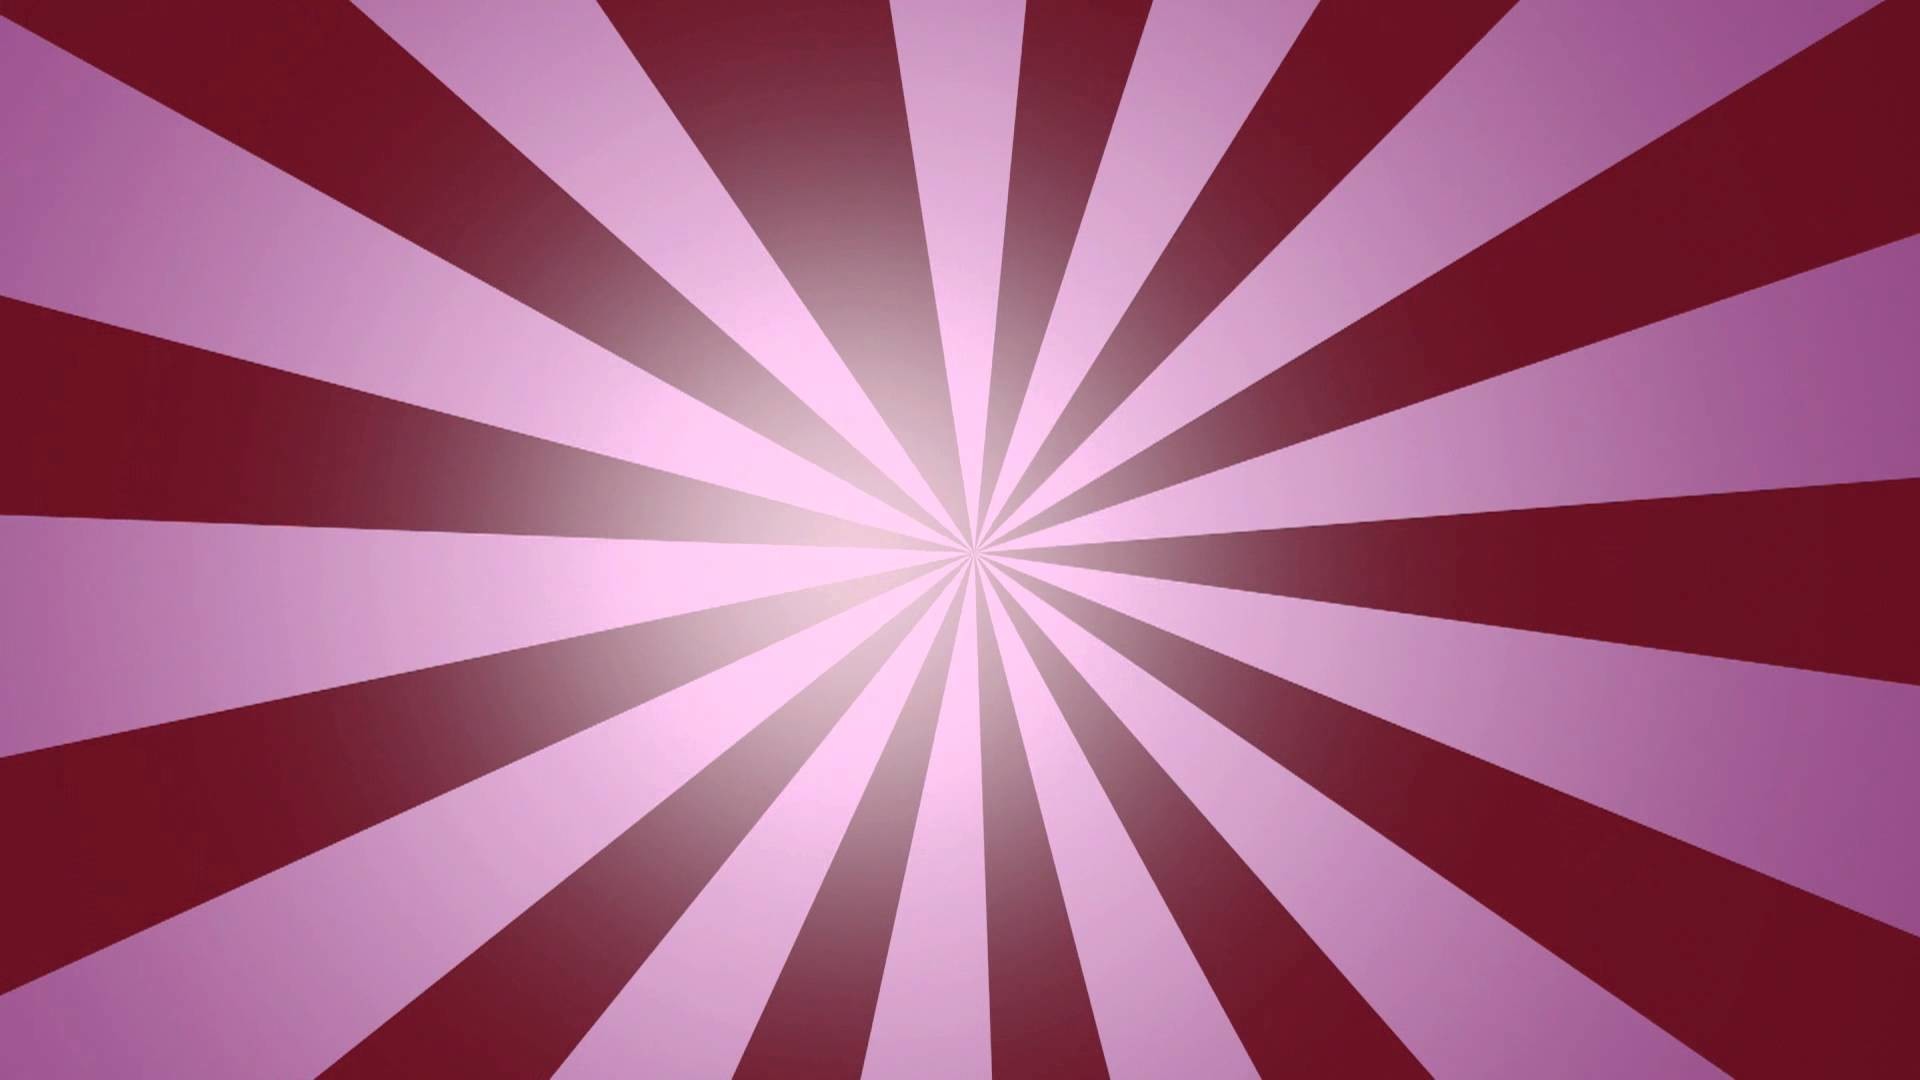 1920x1080 Party star - loop HD animated background #03 - YouTube